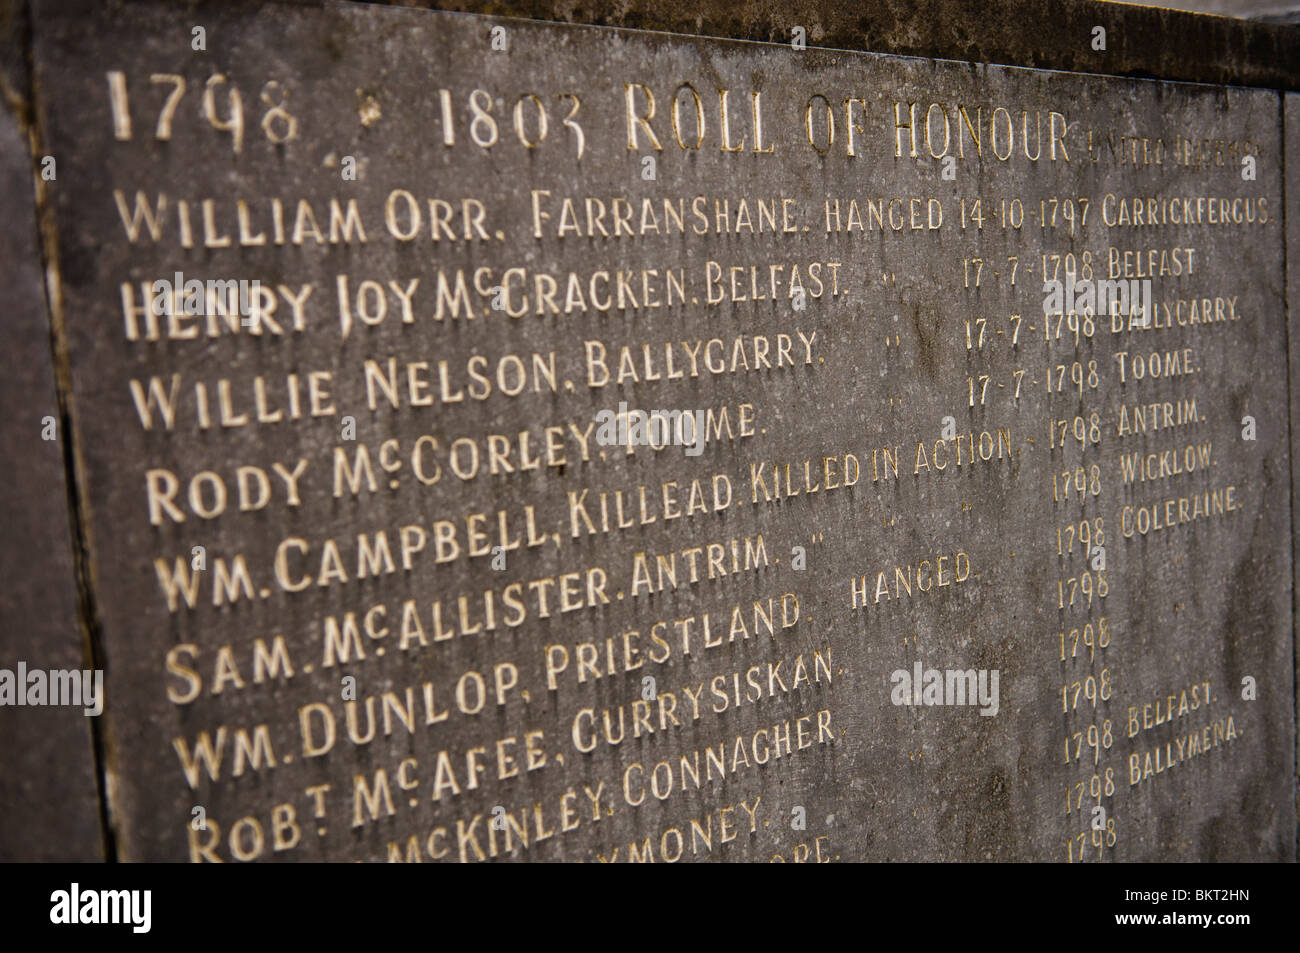 Roll of Honour of Irish Republican dead from the United Irishmen, 1798-1803 including William Orr and Henry Joy McCracken. Stock Photo